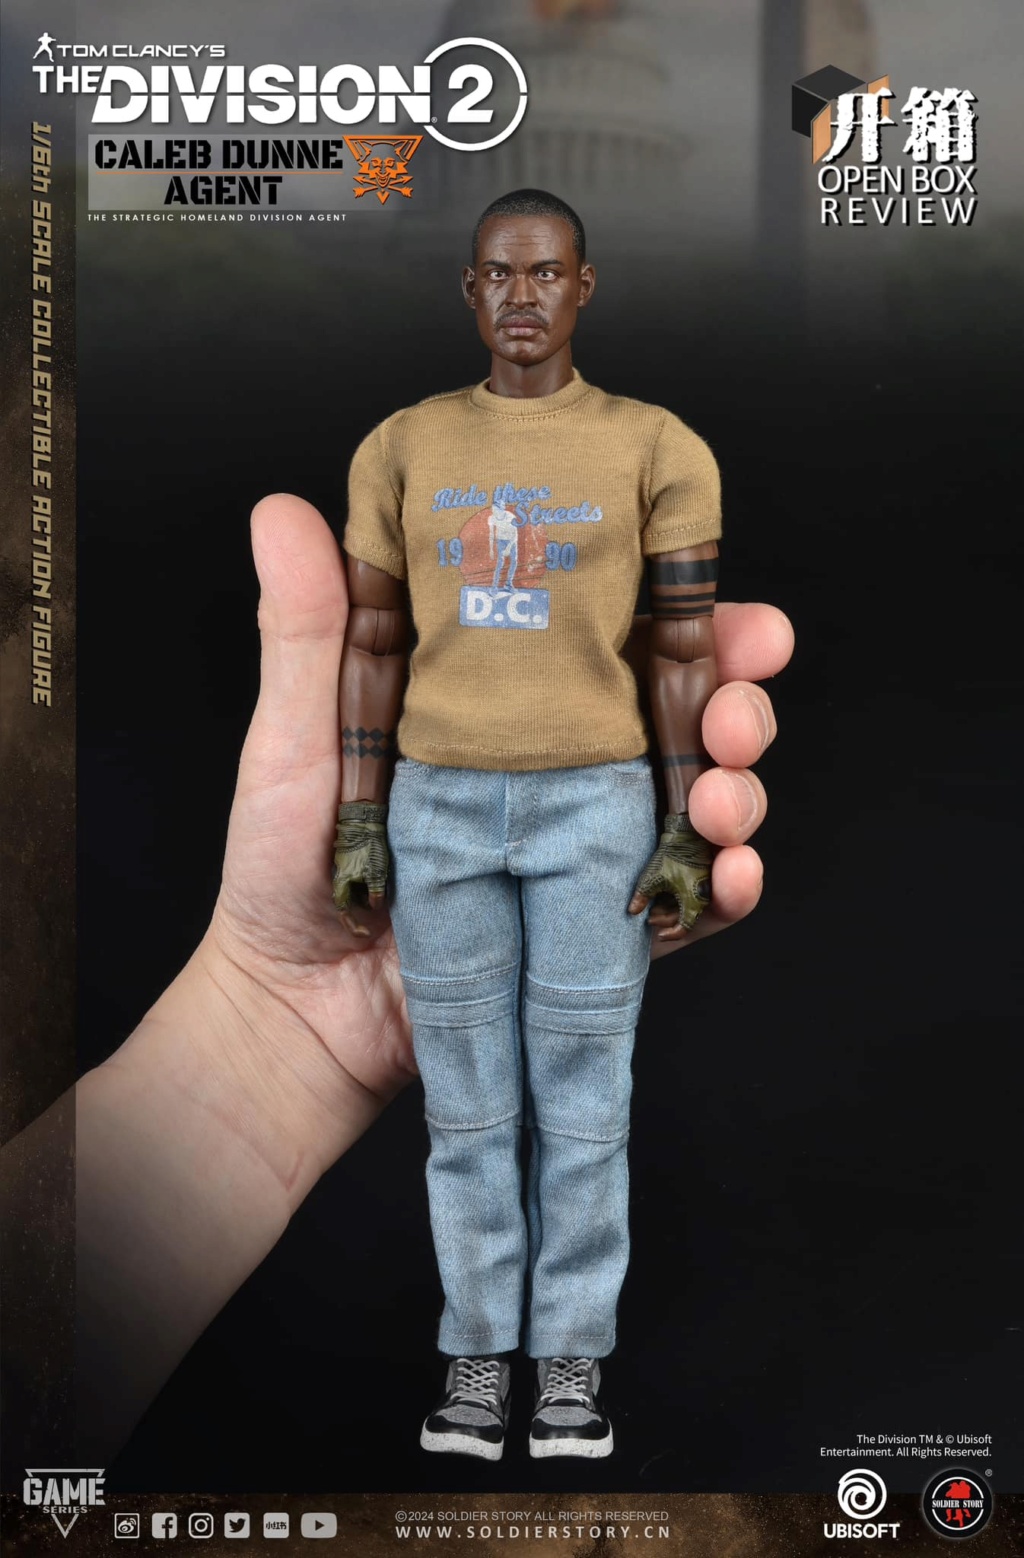 VideoGame-Based - NEW PRODUCT: SOLDIER STORY: #SSG-008 1/6 Scale The Division 2 Agent “Caleb Dunne” Soldie19